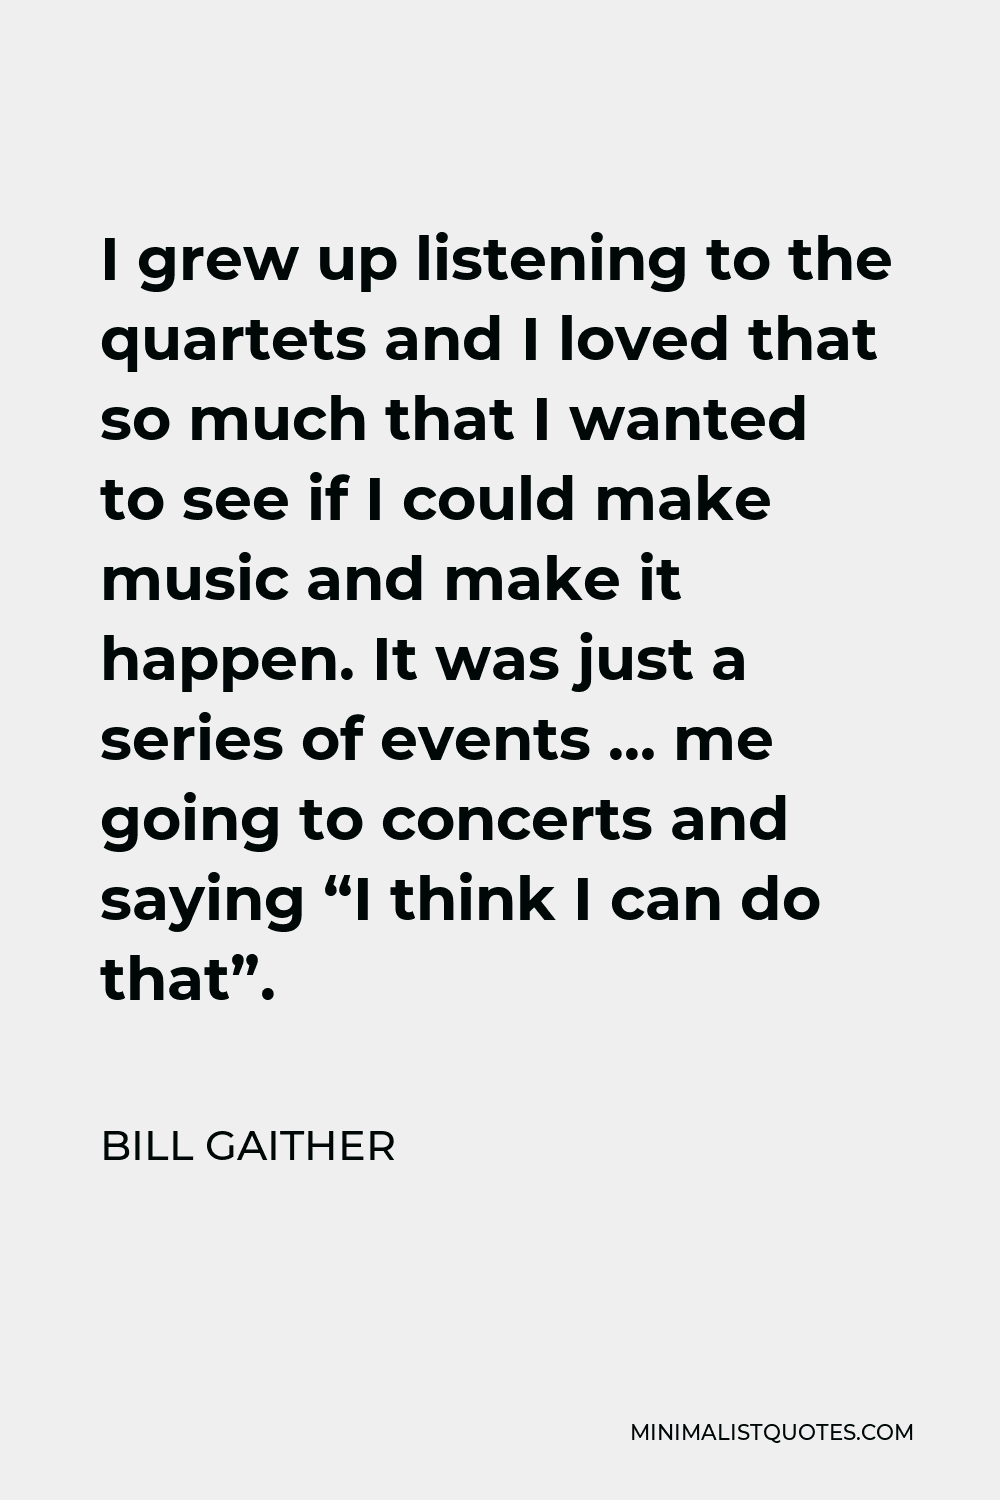 Bill Gaither Quote - I grew up listening to the quartets and I loved that so much that I wanted to see if I could make music and make it happen. It was just a series of events … me going to concerts and saying “I think I can do that”.